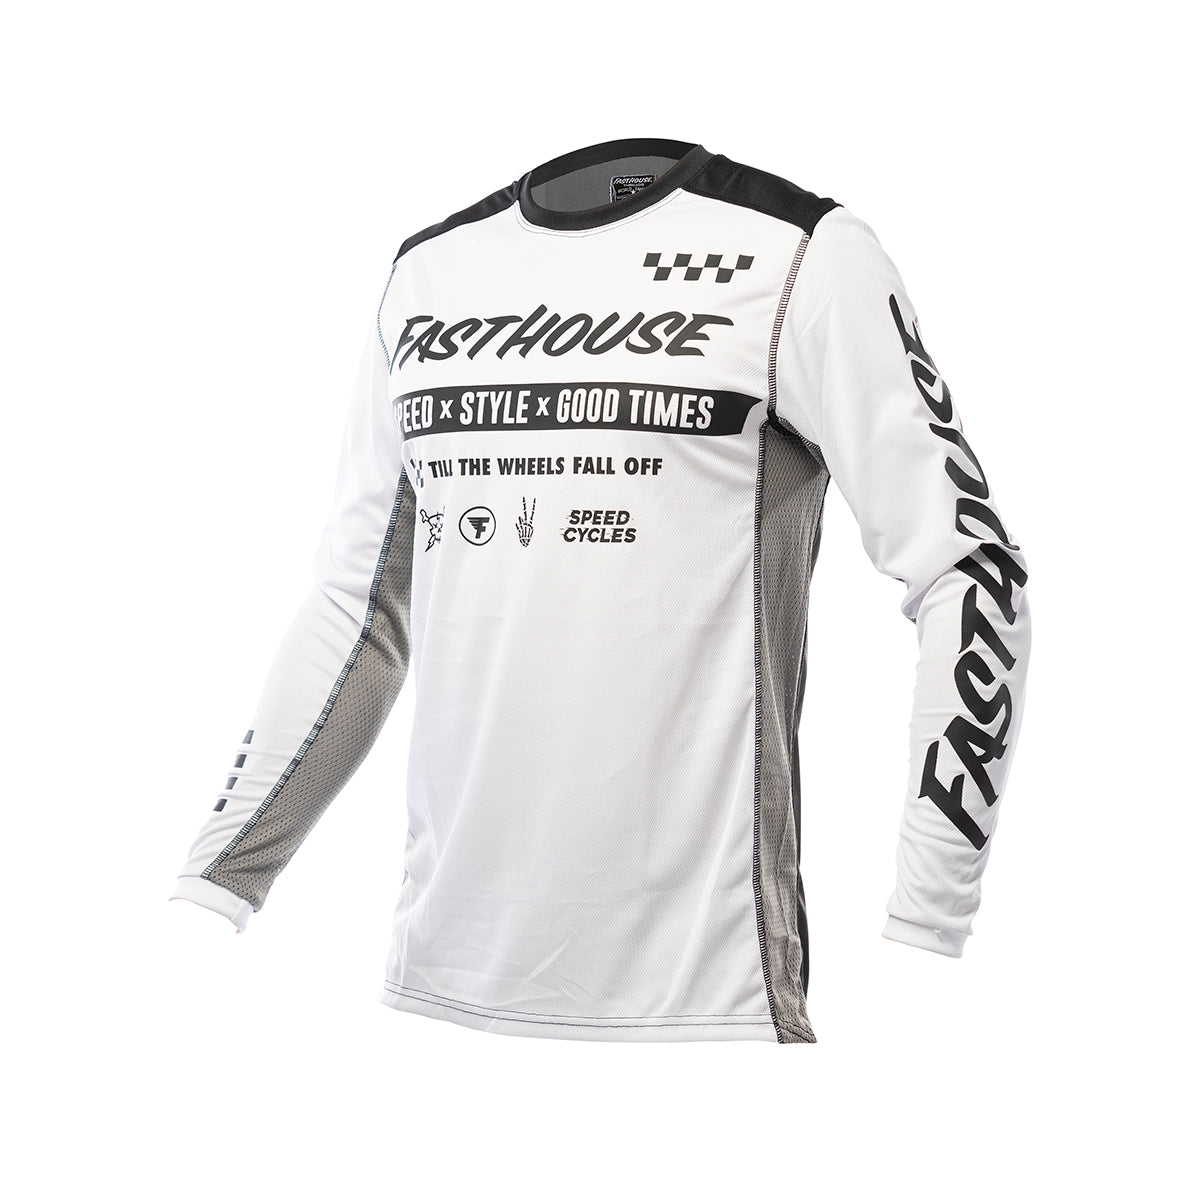 Grindhouse Domingo Youth Jersey - White